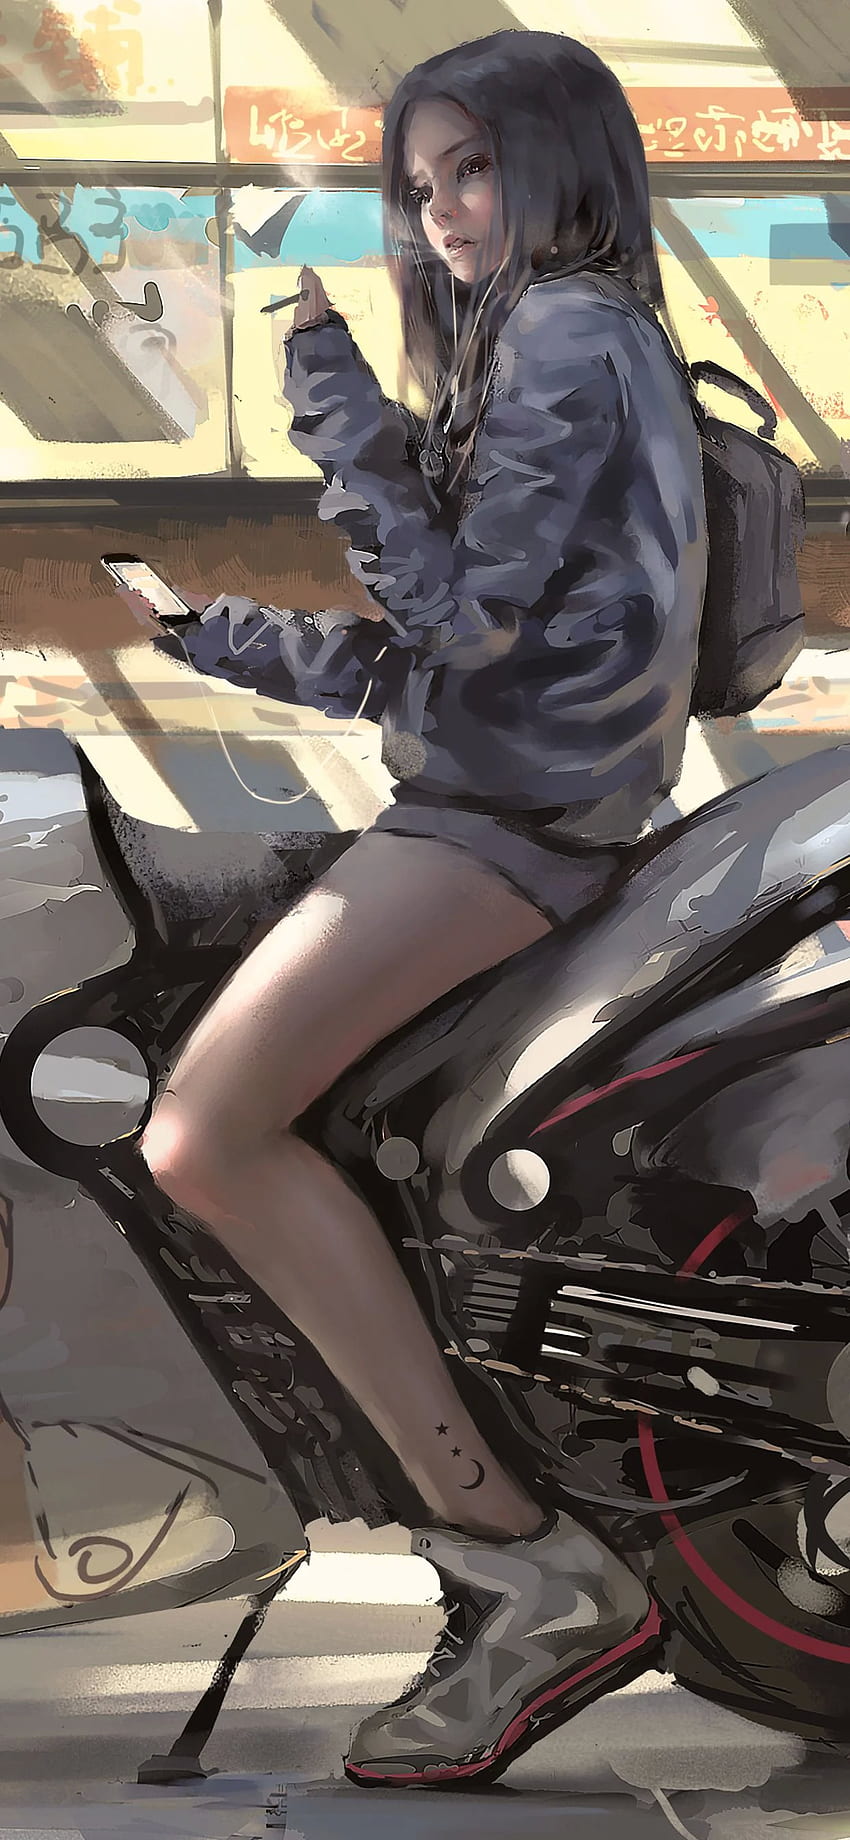 444808 motorcycle, anime girls, anime - Rare Gallery HD Wallpapers